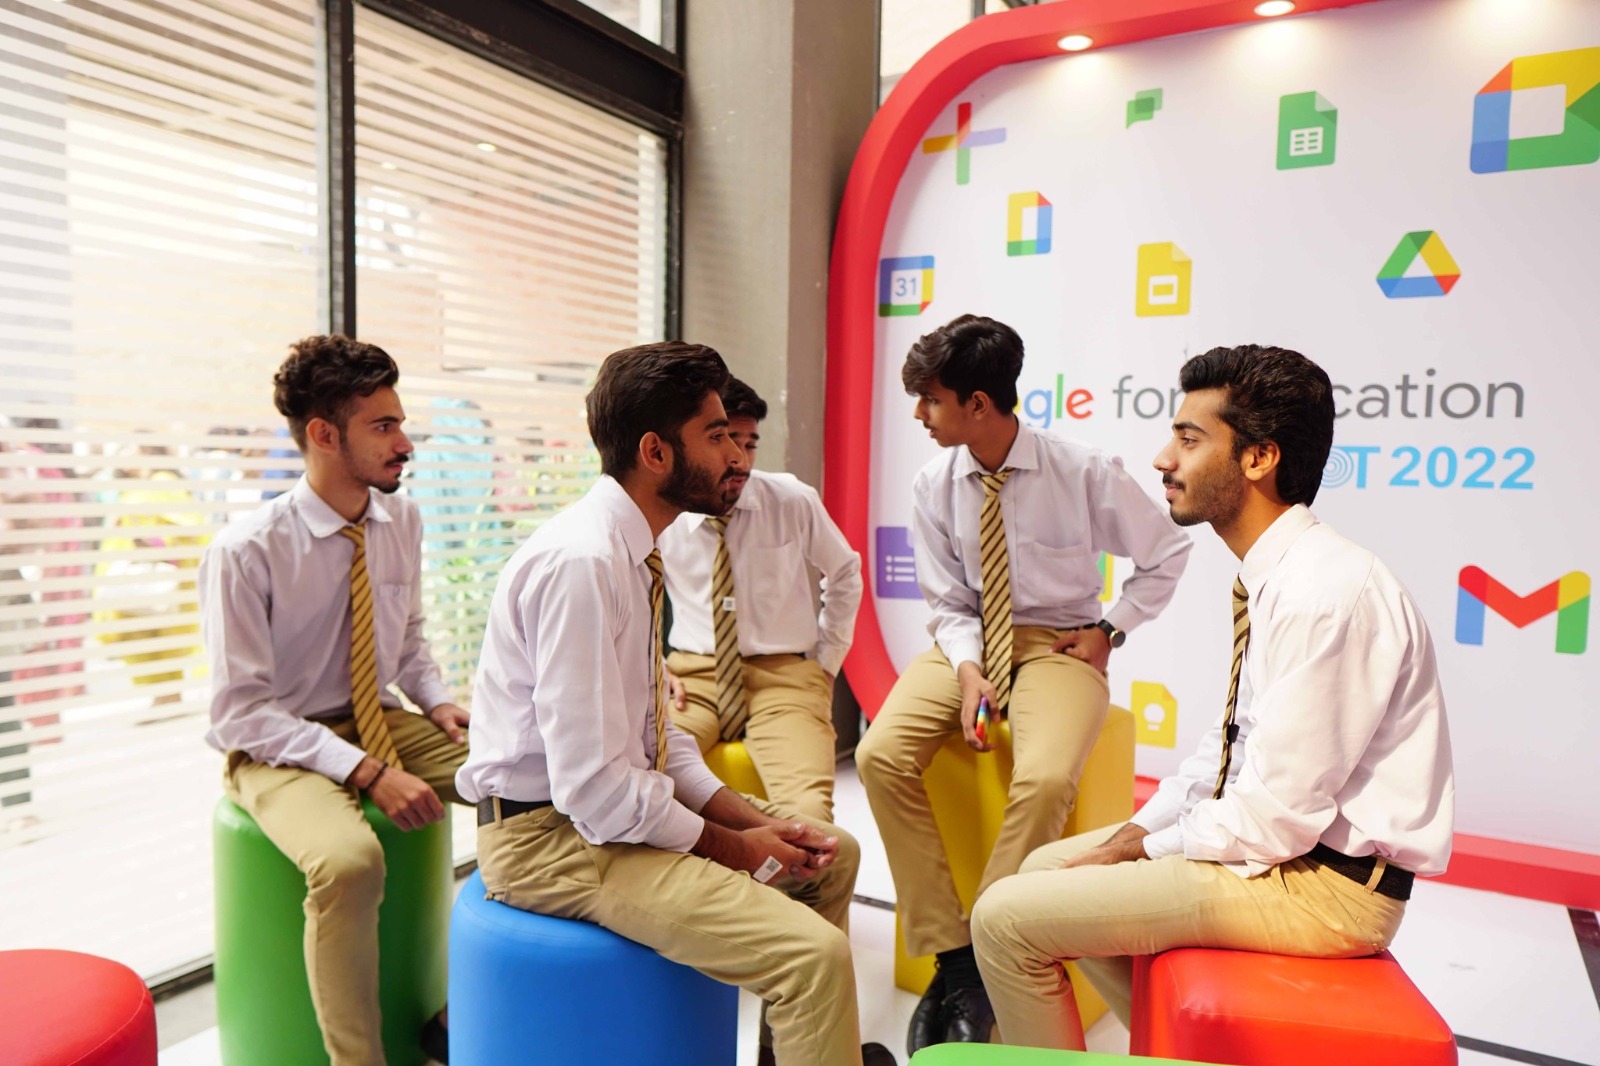 A transformative collaboration has been initiated by Beaconhouse, the largest education network in Pakistan, with Tech Valley, the partner for Google for Education in Pakistan.